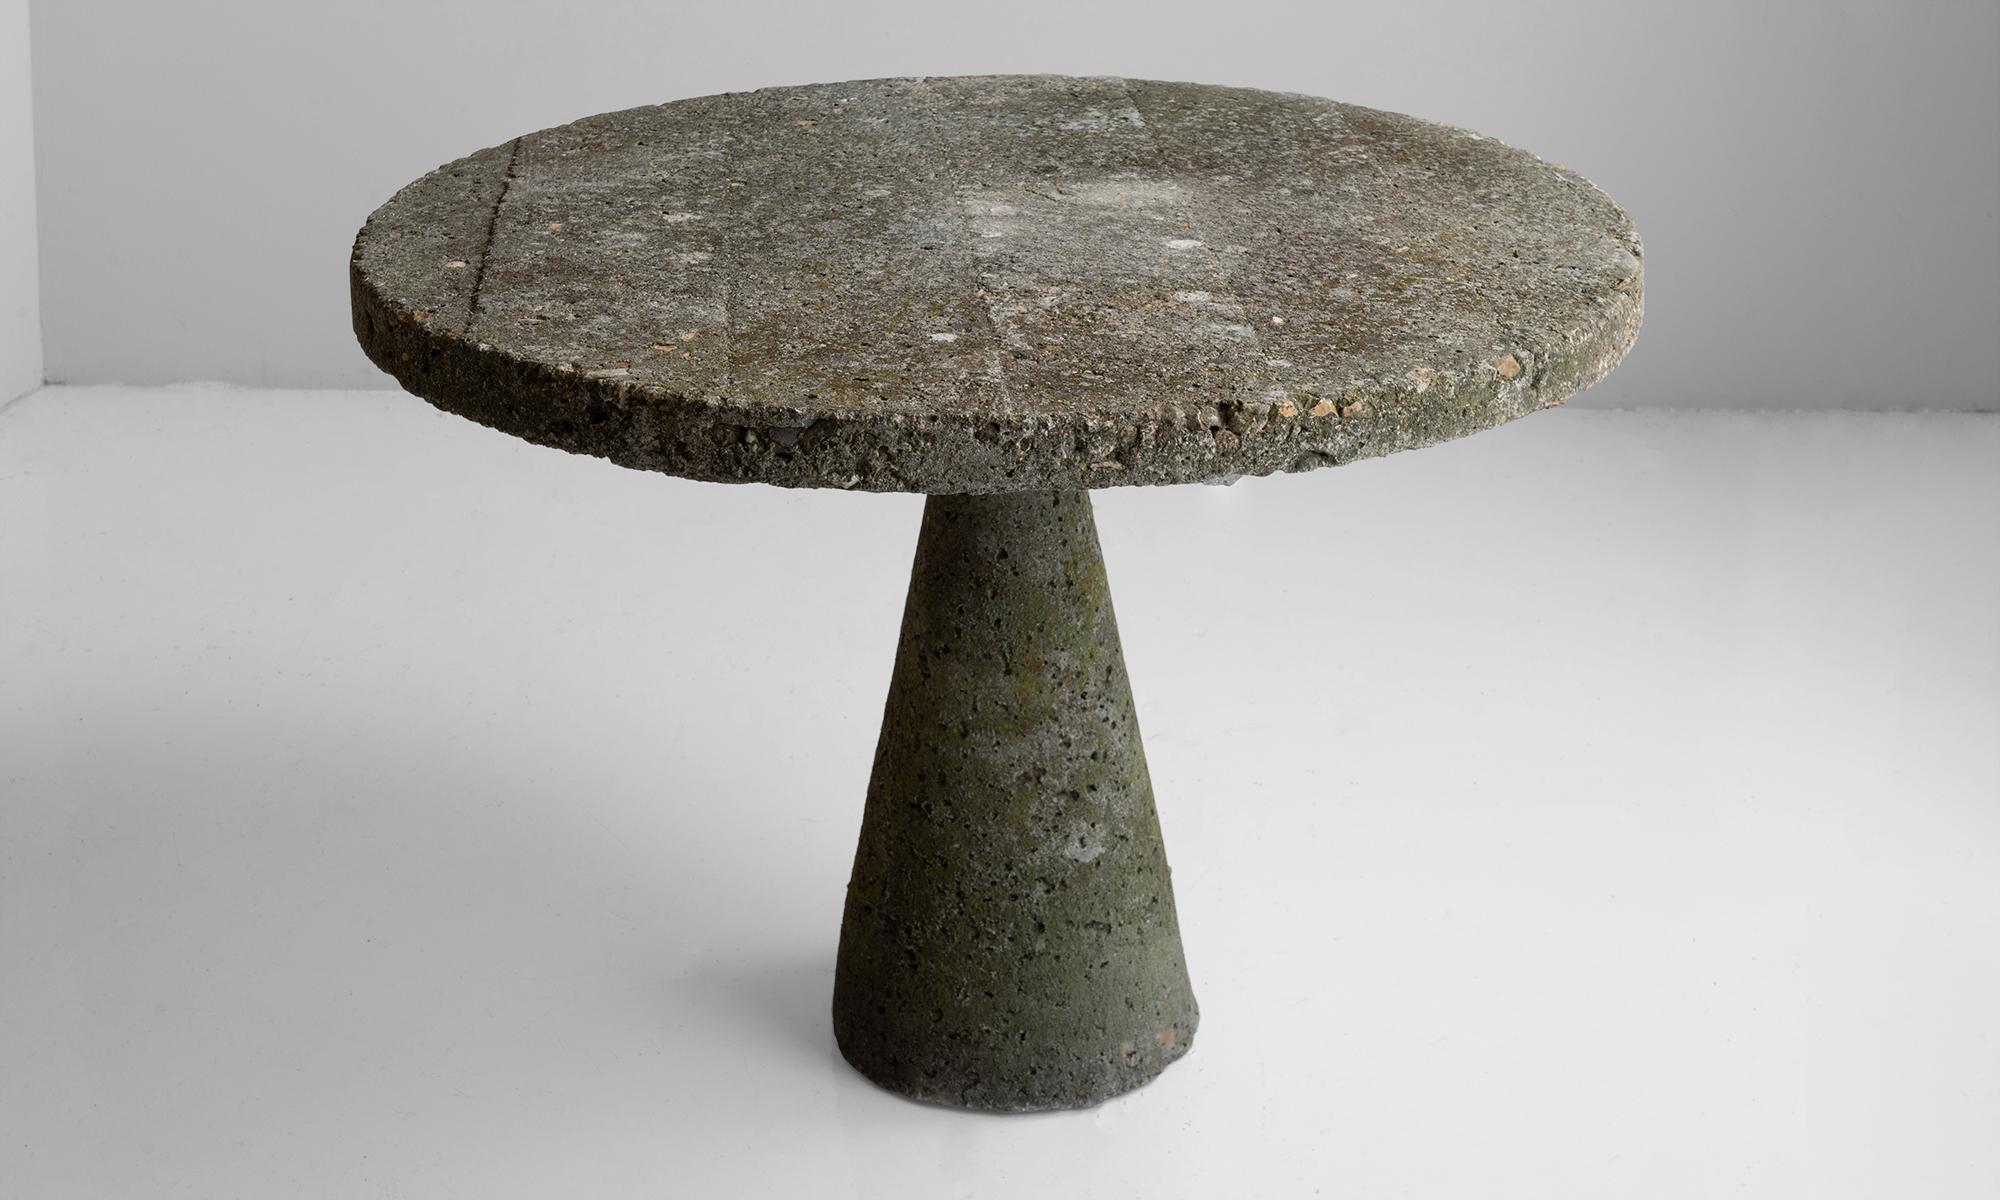 Constructivist cement garden table, France, 1950.

Minimal form table, with wonderful patina.